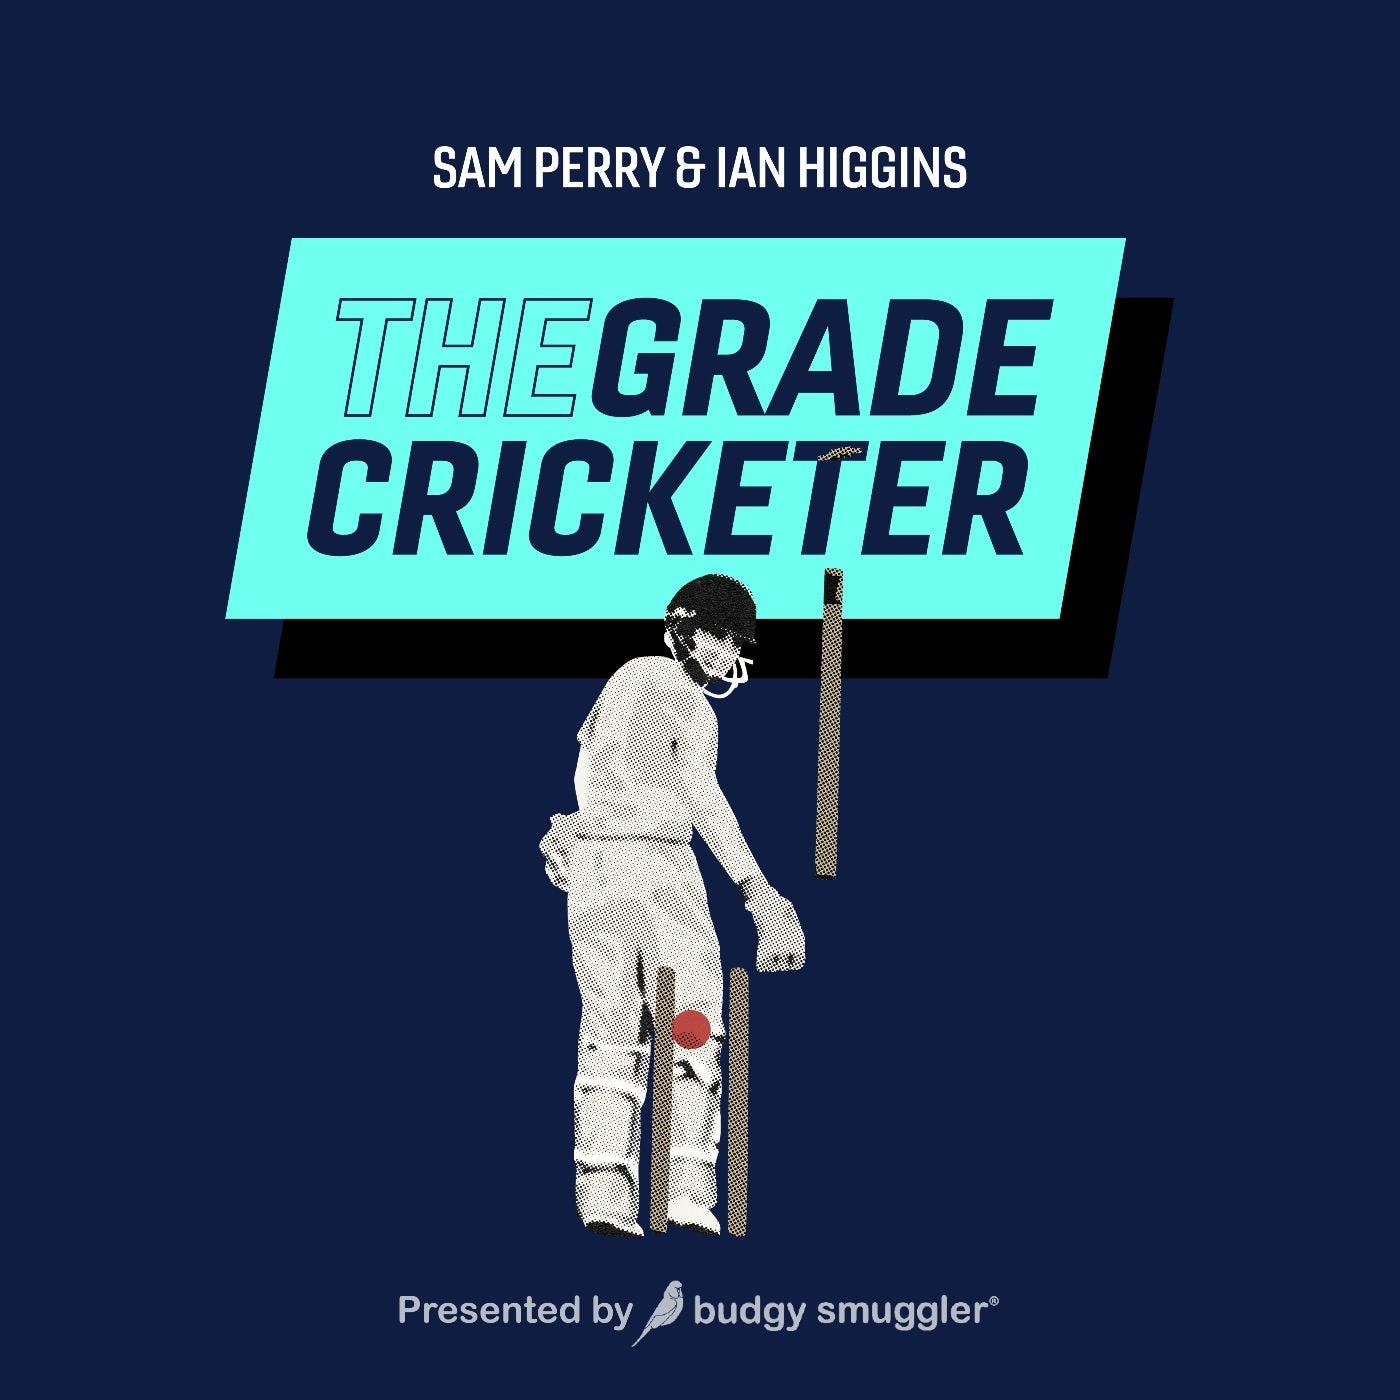 177. They're Nervous, We're Calm, with Mitch Marsh & Jonathan Liew